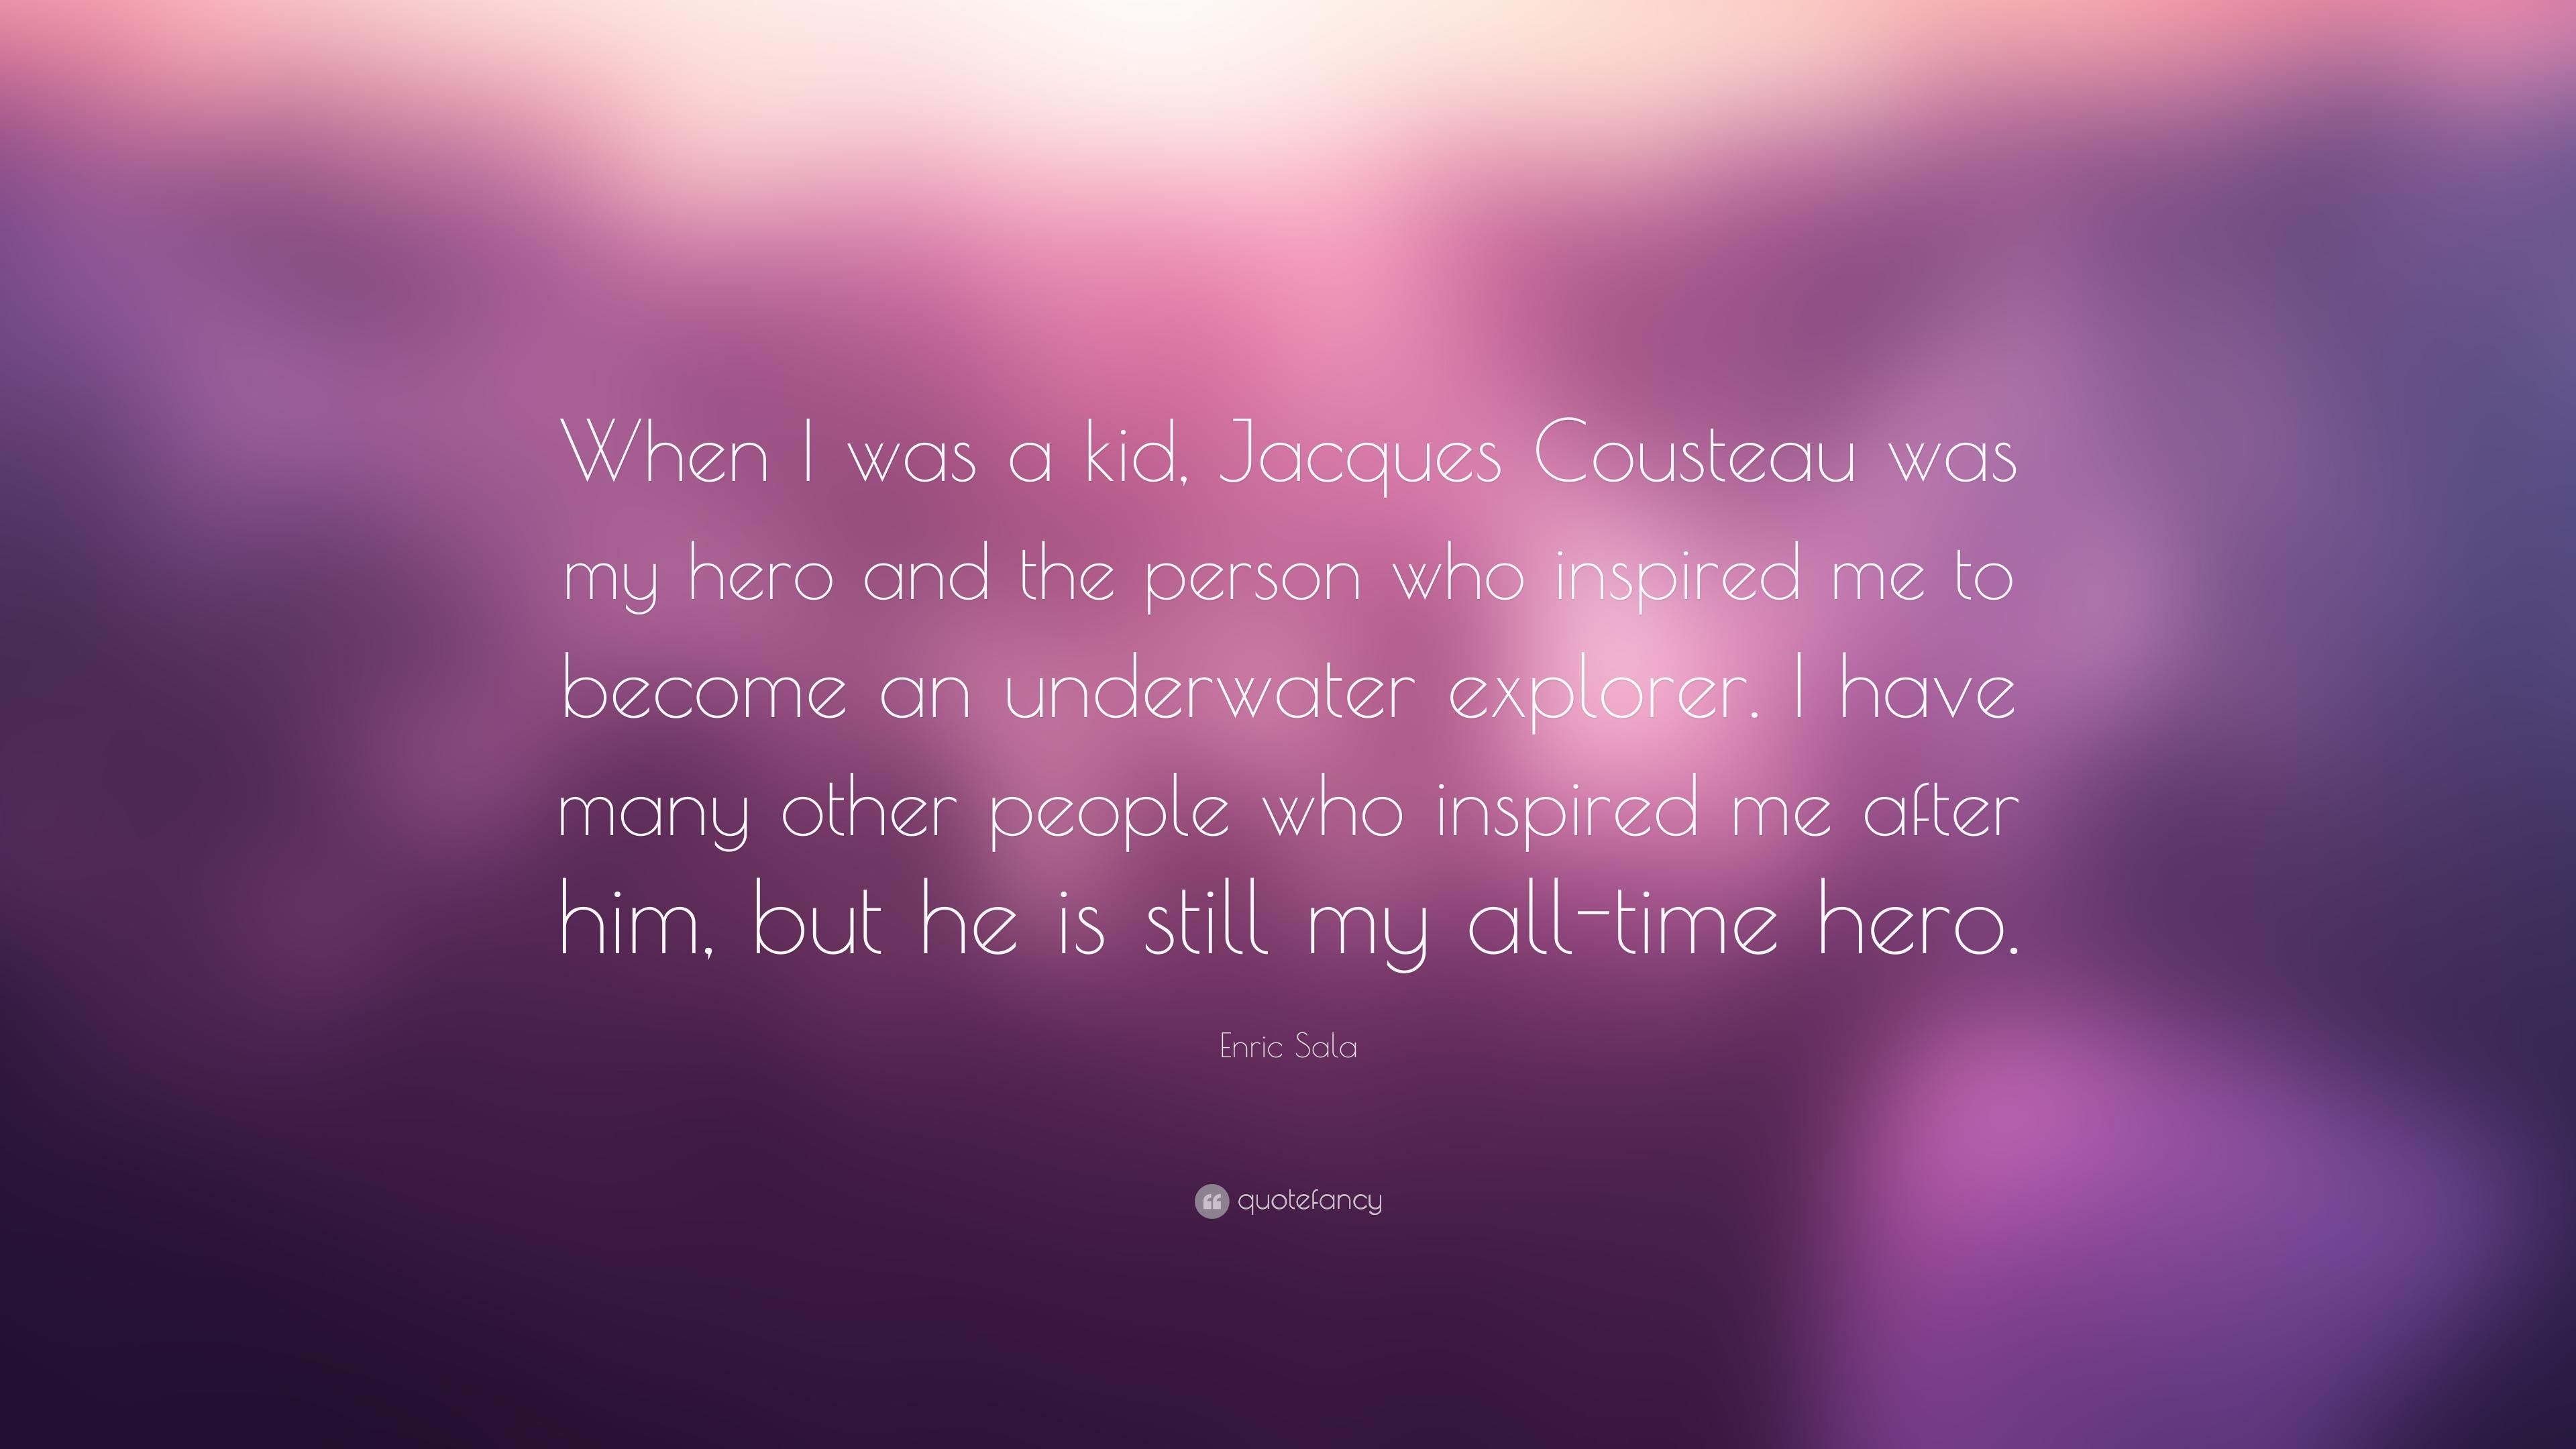 Enric Sala Quote: “When I was a kid, Jacques Cousteau was my hero